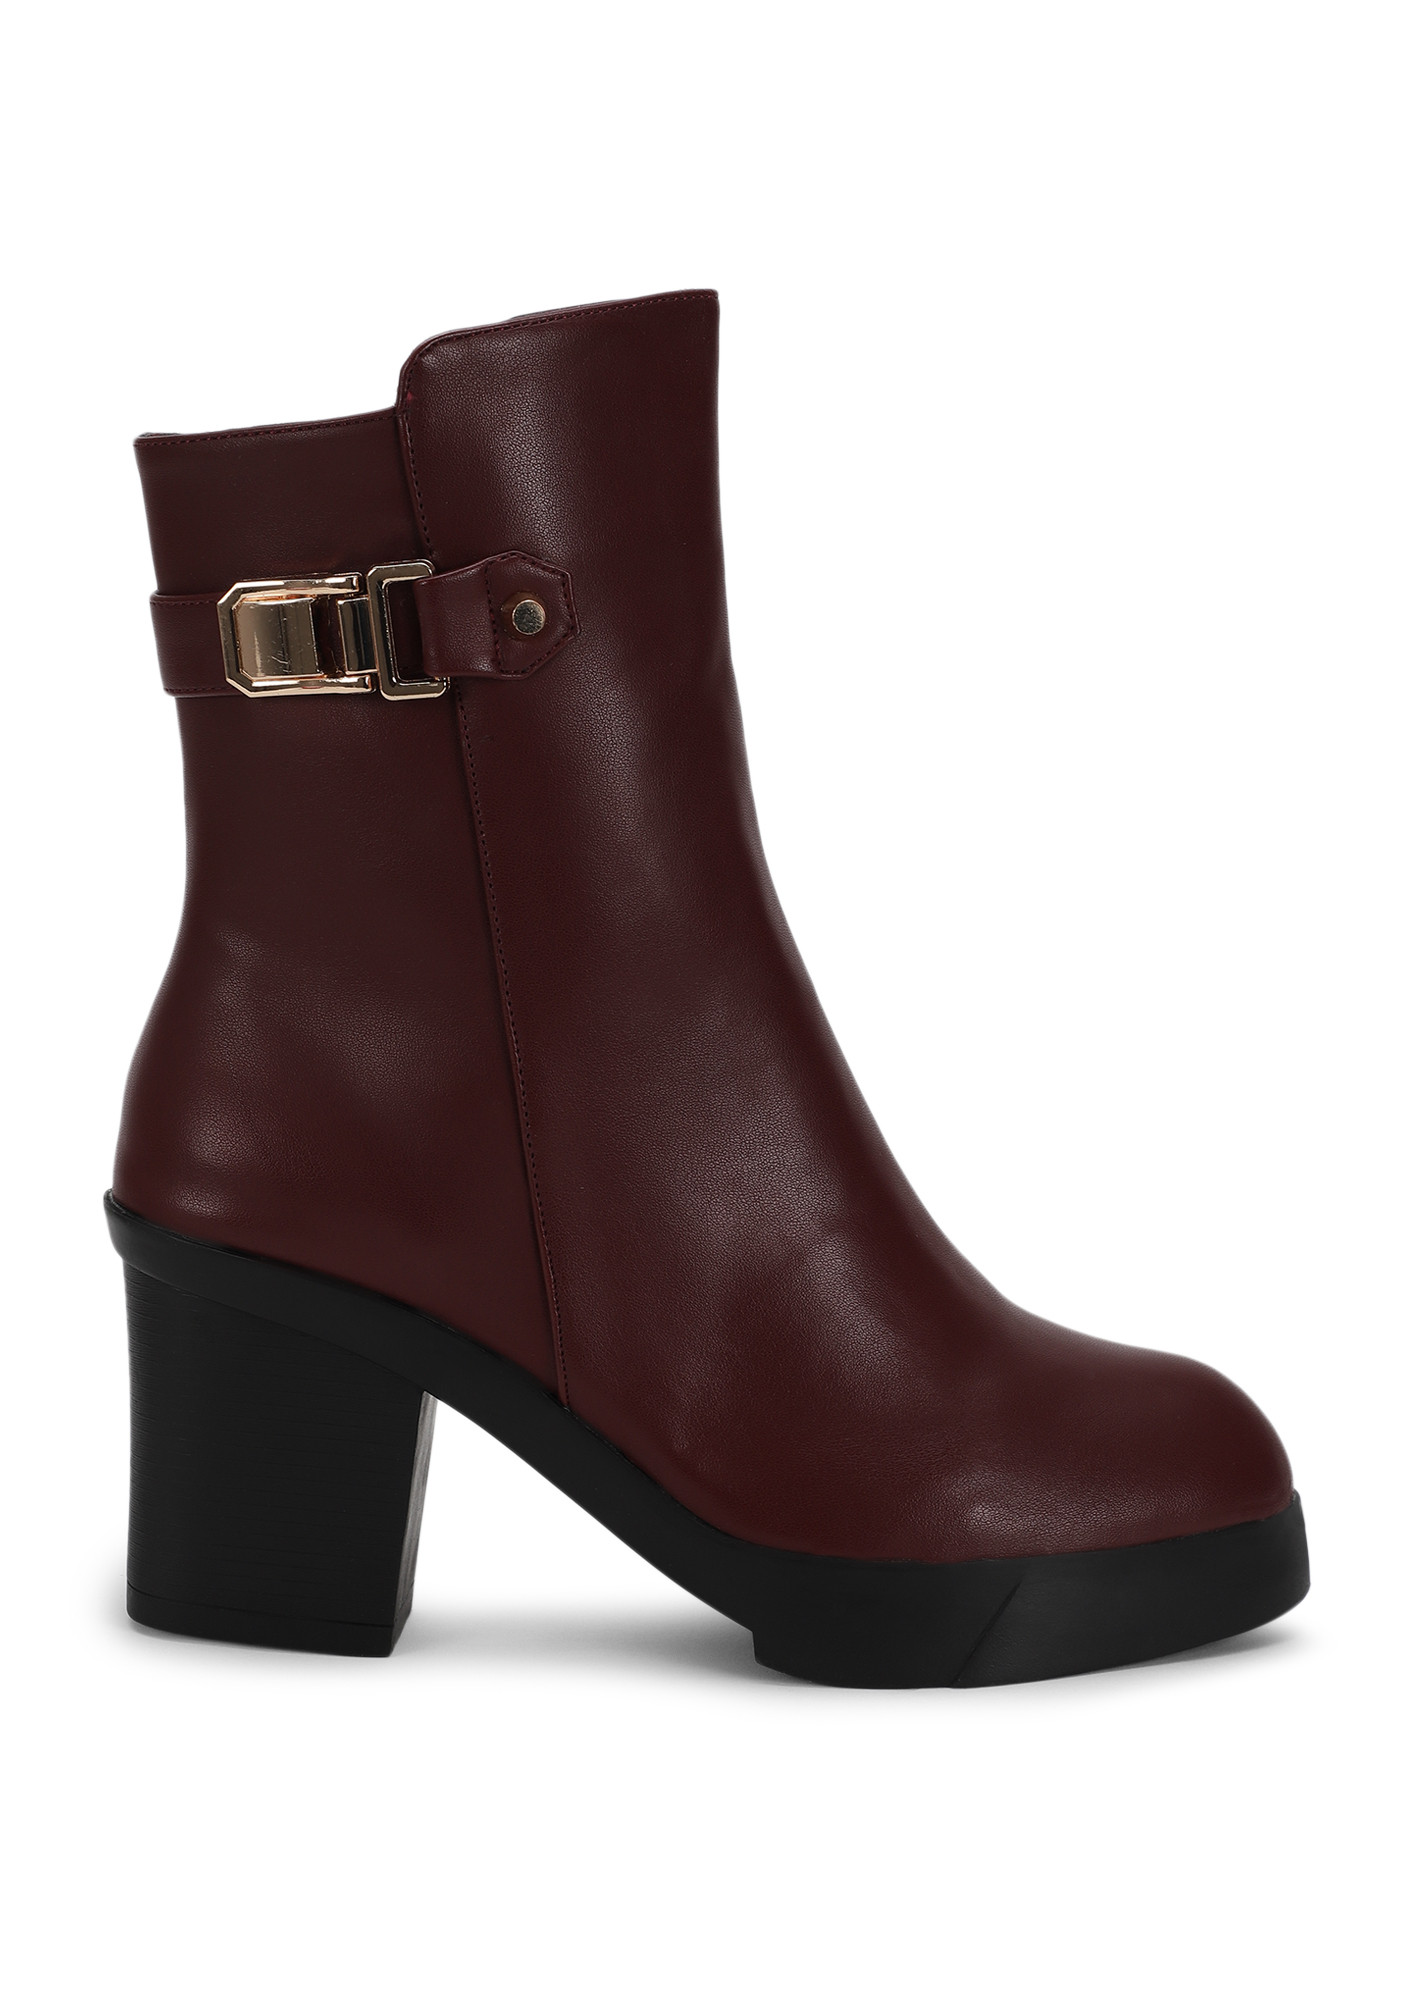 MAKING A SMART MOVE WINE ANKLE BOOTS